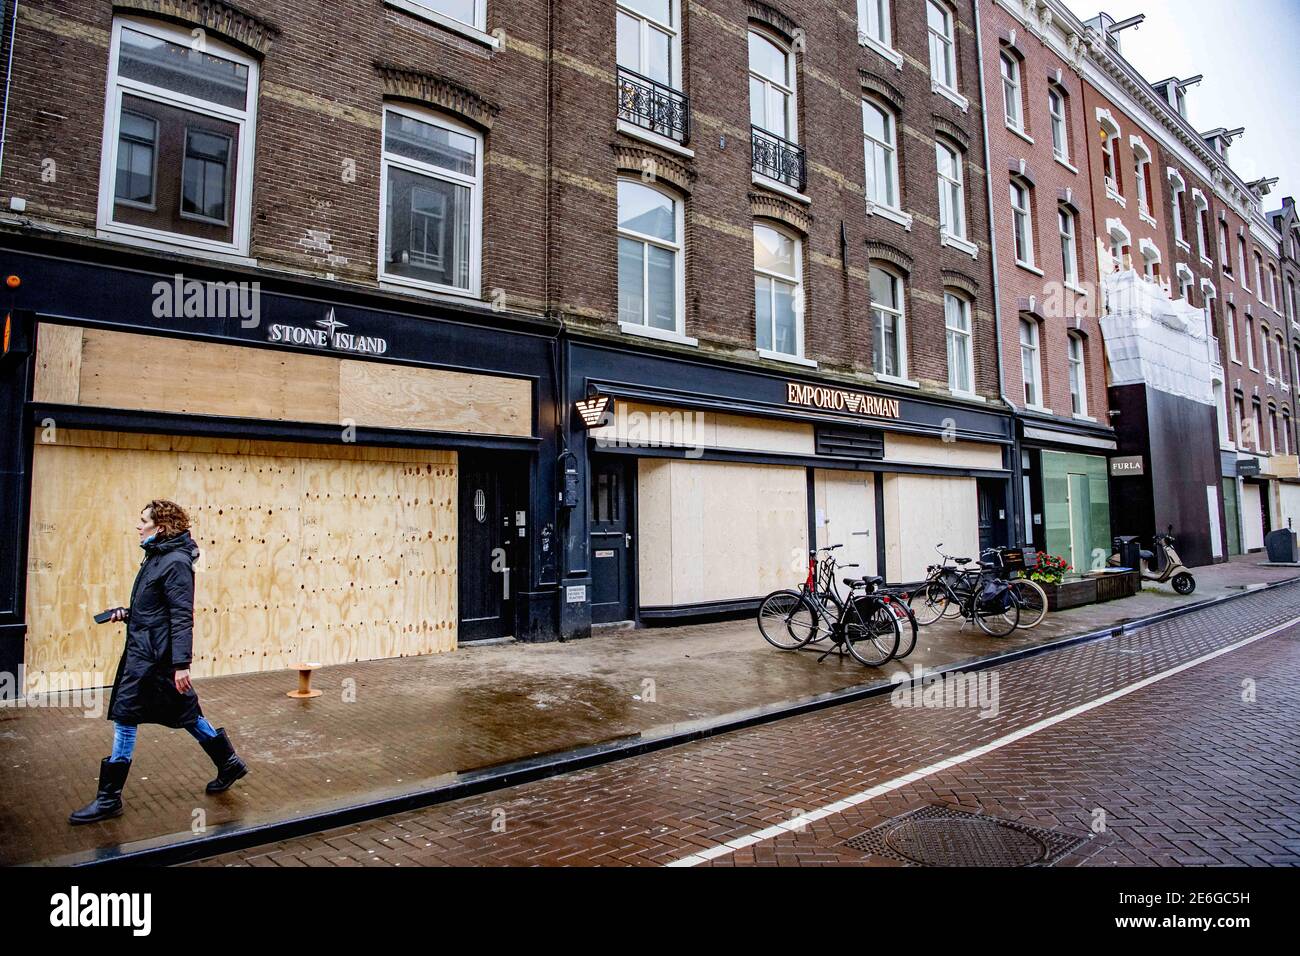 Shopkeepers have barricaded and boarded up their business in Amsterdam,  Netherlands on January 28, 2021. The entrepreneurs in the chic shopping  street fear damage if riots break out. Most of the stores